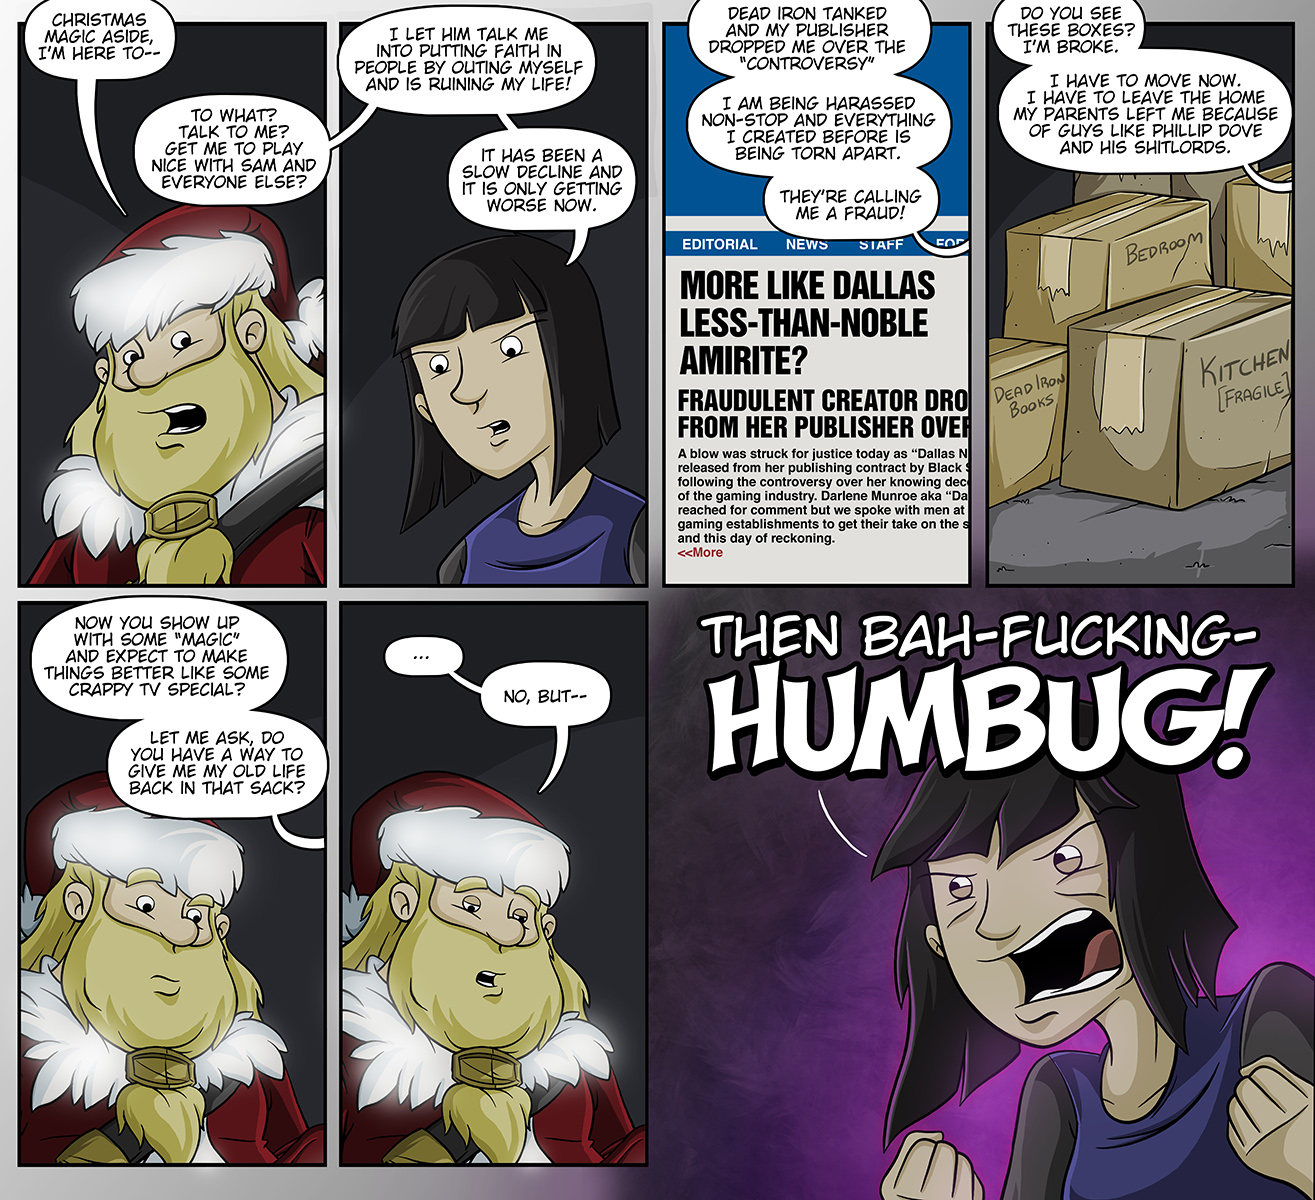 Bah-Fucking-Humbug sounds like the title of the worst porno ever.